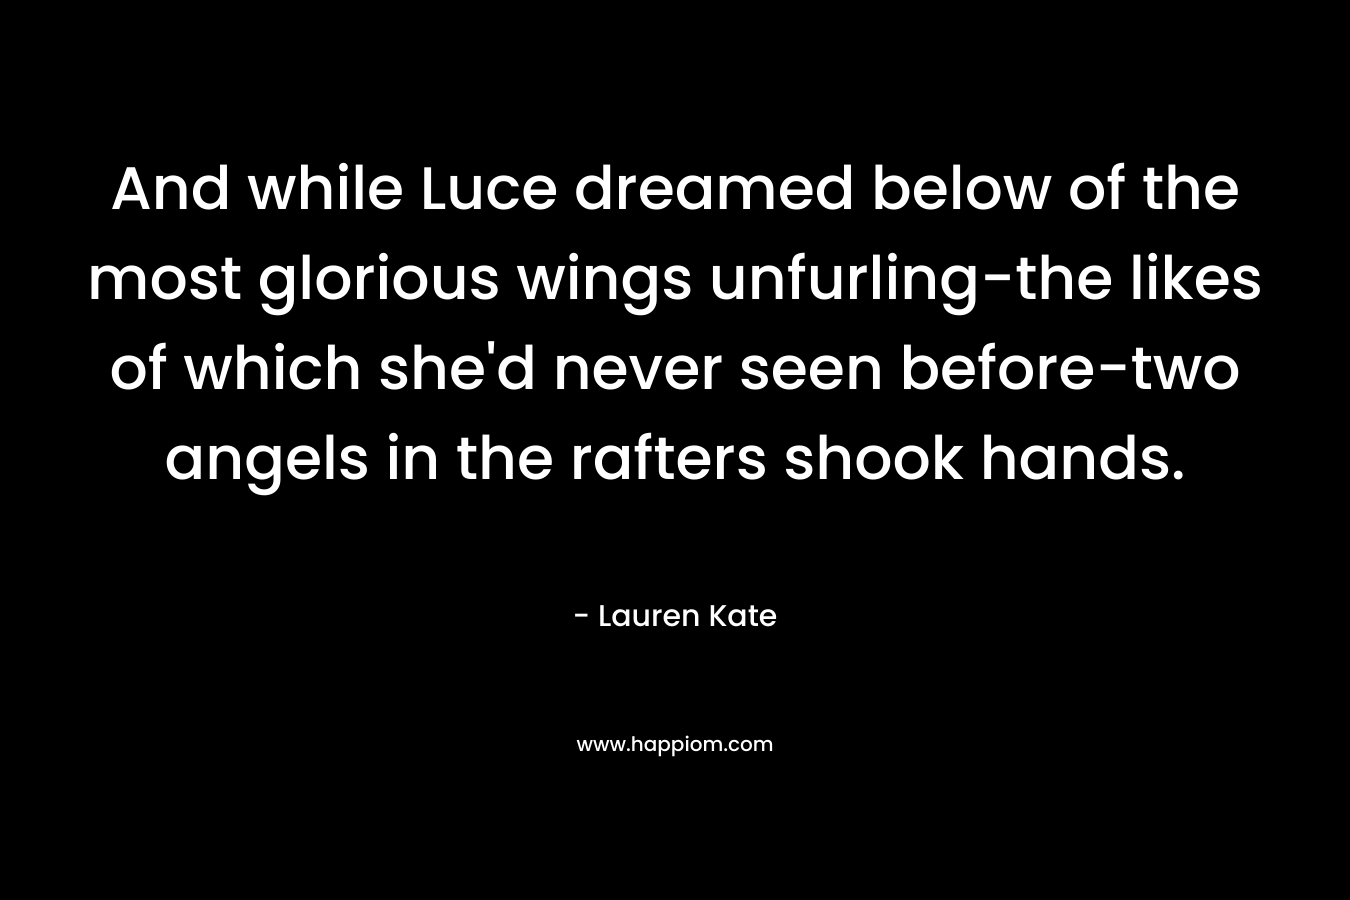 And while Luce dreamed below of the most glorious wings unfurling-the likes of which she’d never seen before-two angels in the rafters shook hands. – Lauren Kate